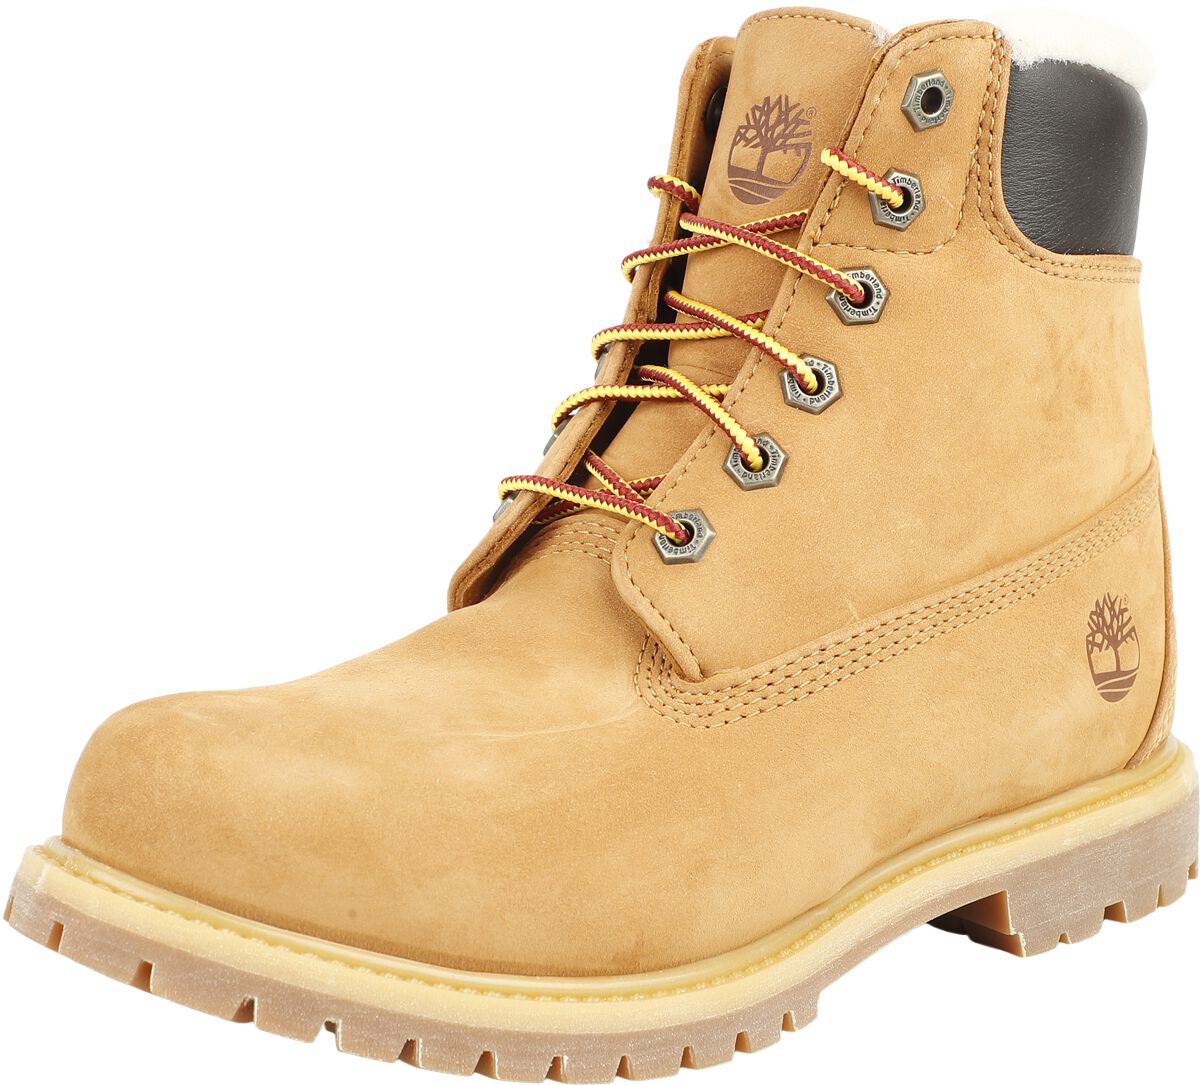 Timberland 6 Inch Premium Shearling Lined WP Boot Boot braun in EU41